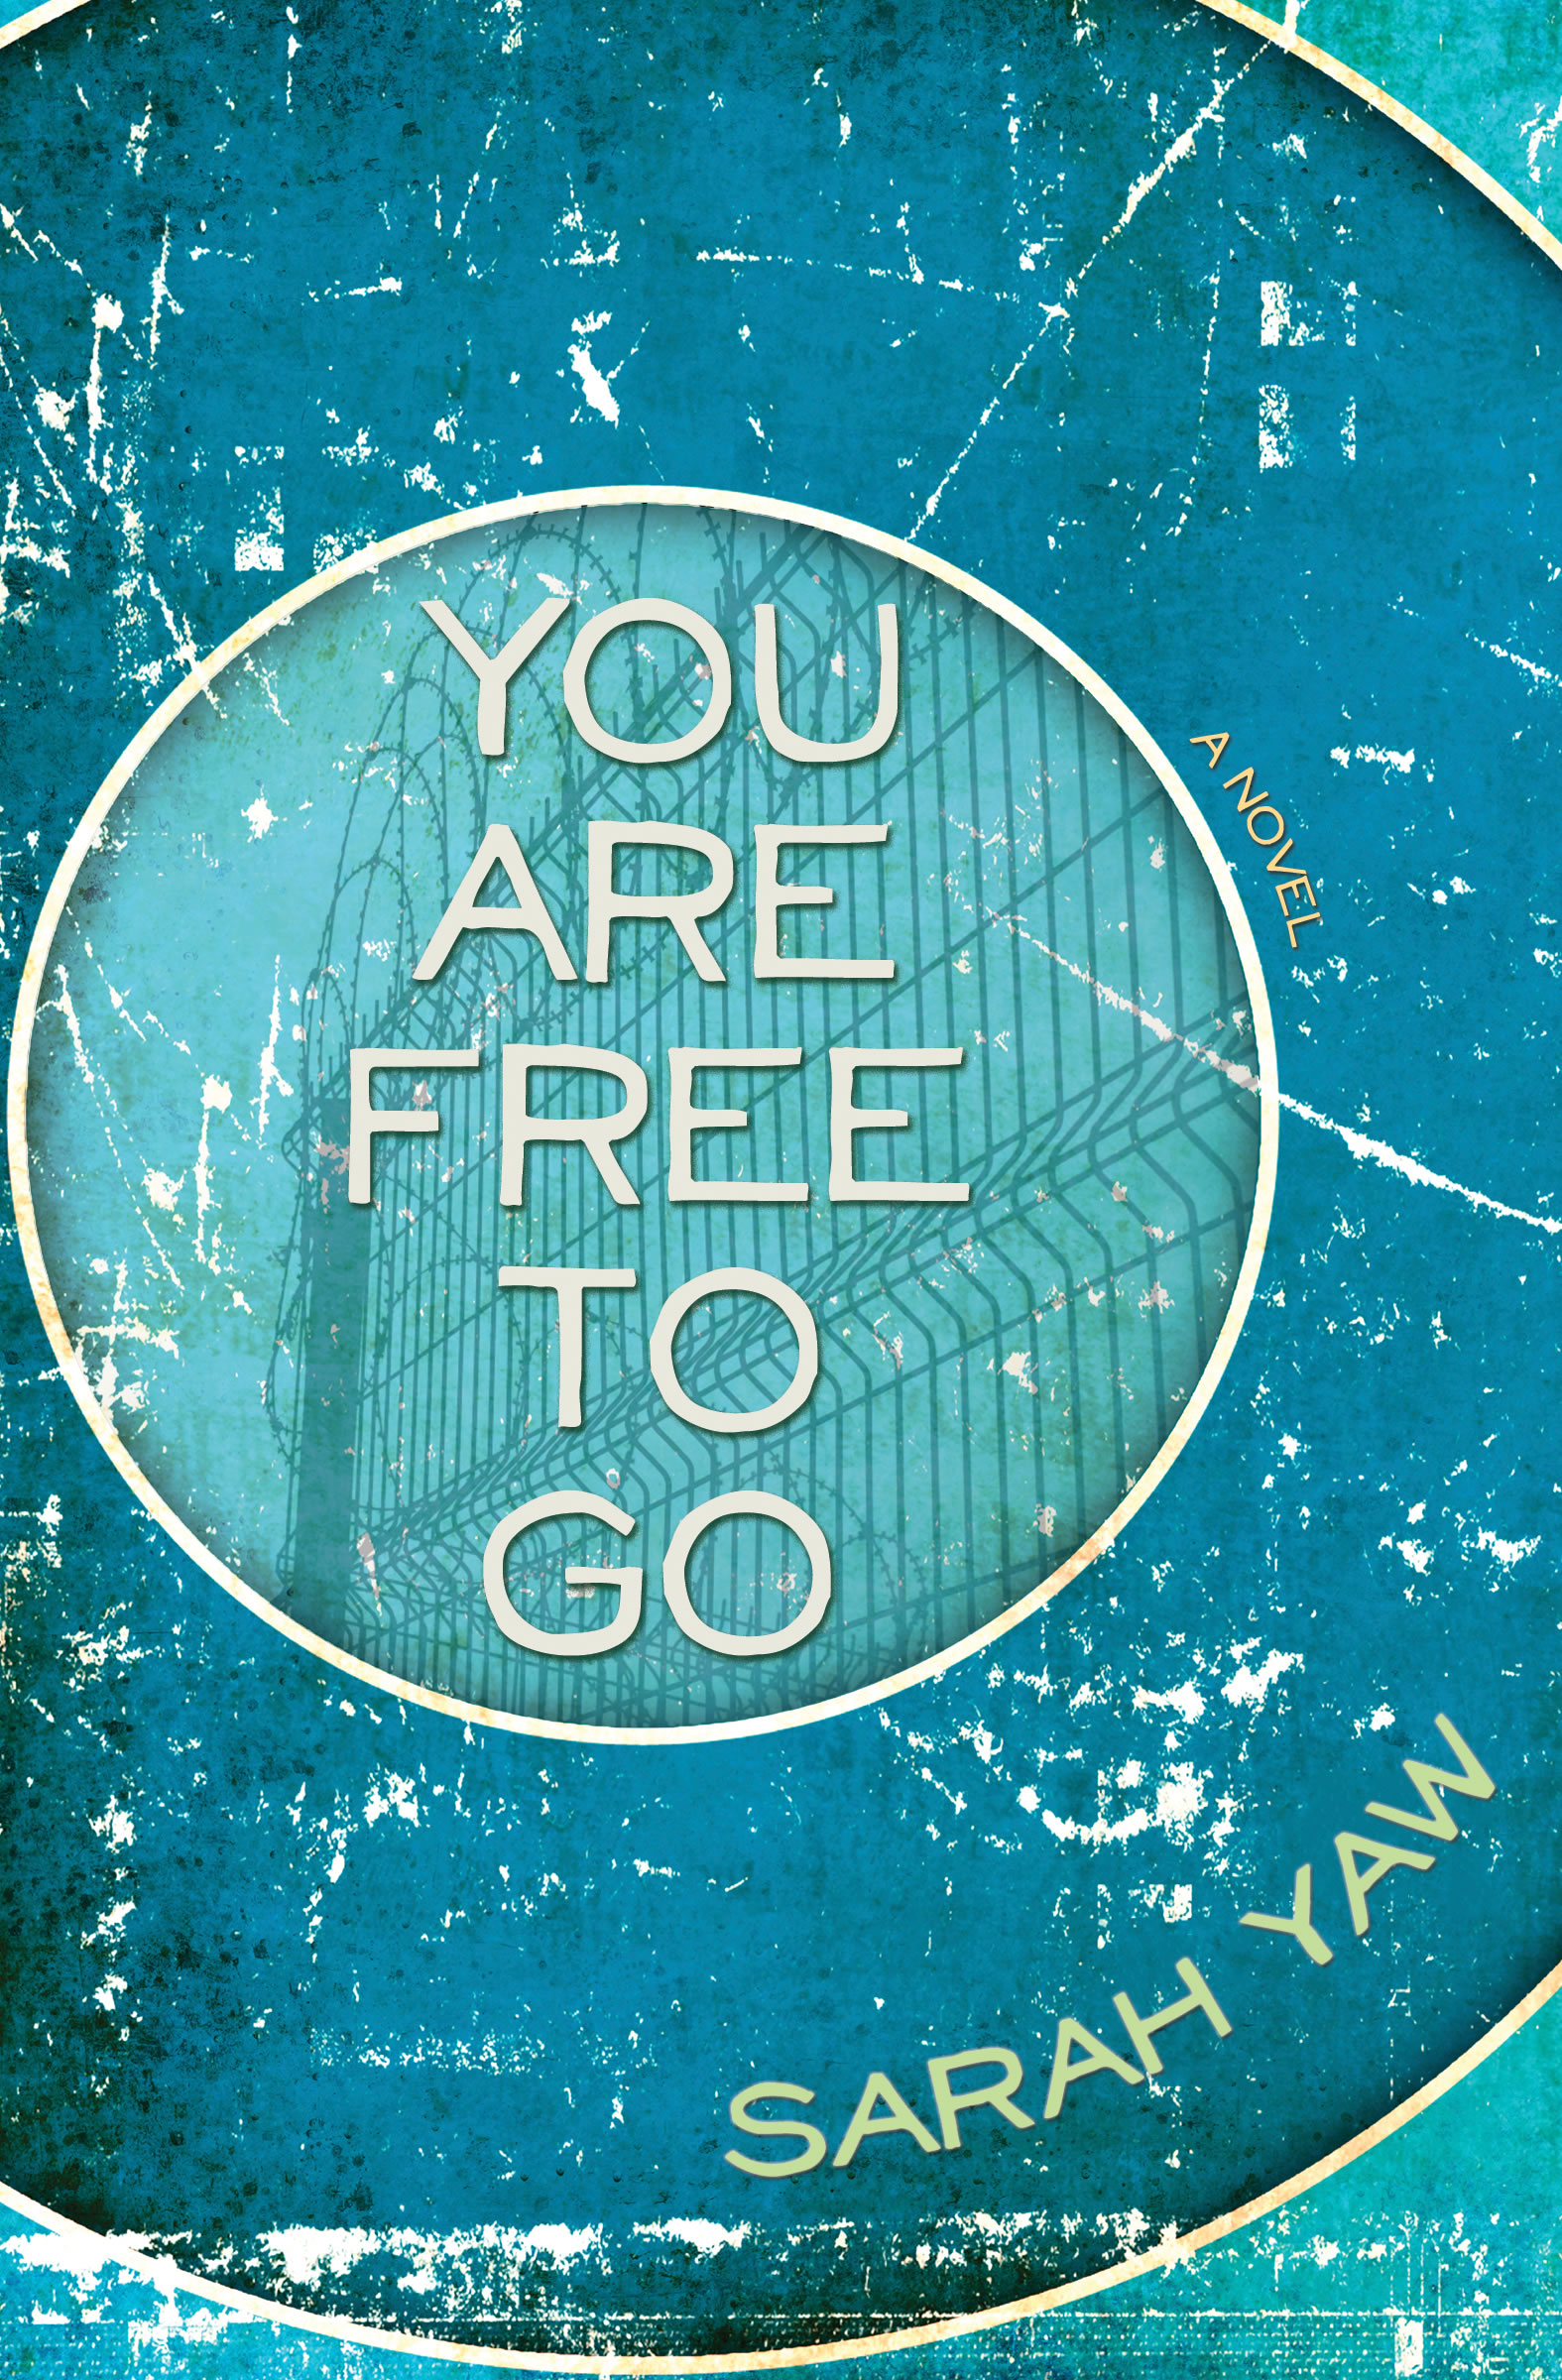 You Are Free to Go, a novel by Sarah Yaw